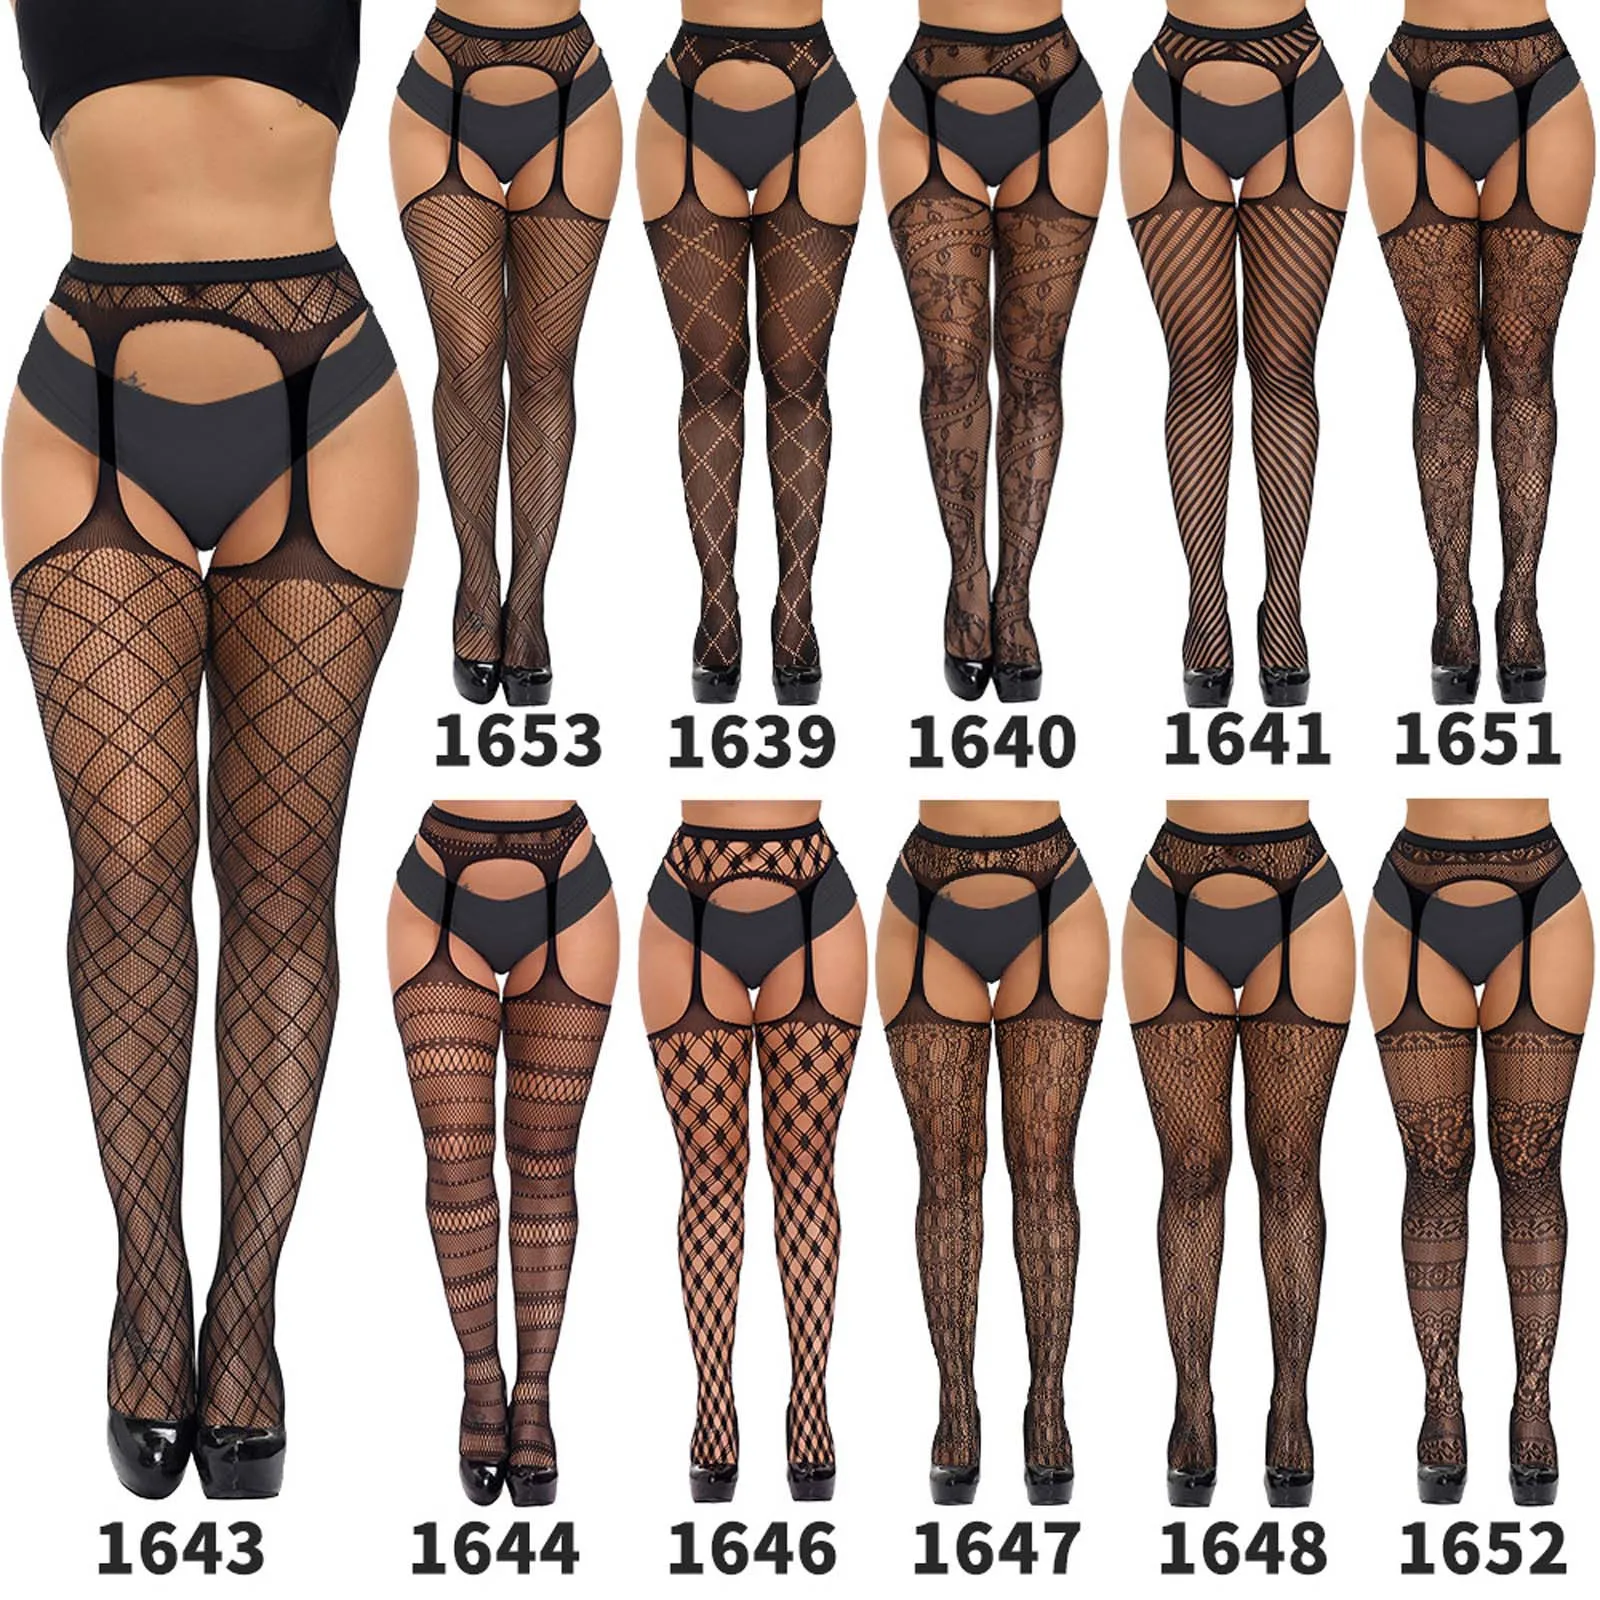 

Women Girls Sexy Lace Stockings With Garter Belt Hot Erotic Open Crotch Fishnet Panty Perspective Over Knee Pantyhose Чулки